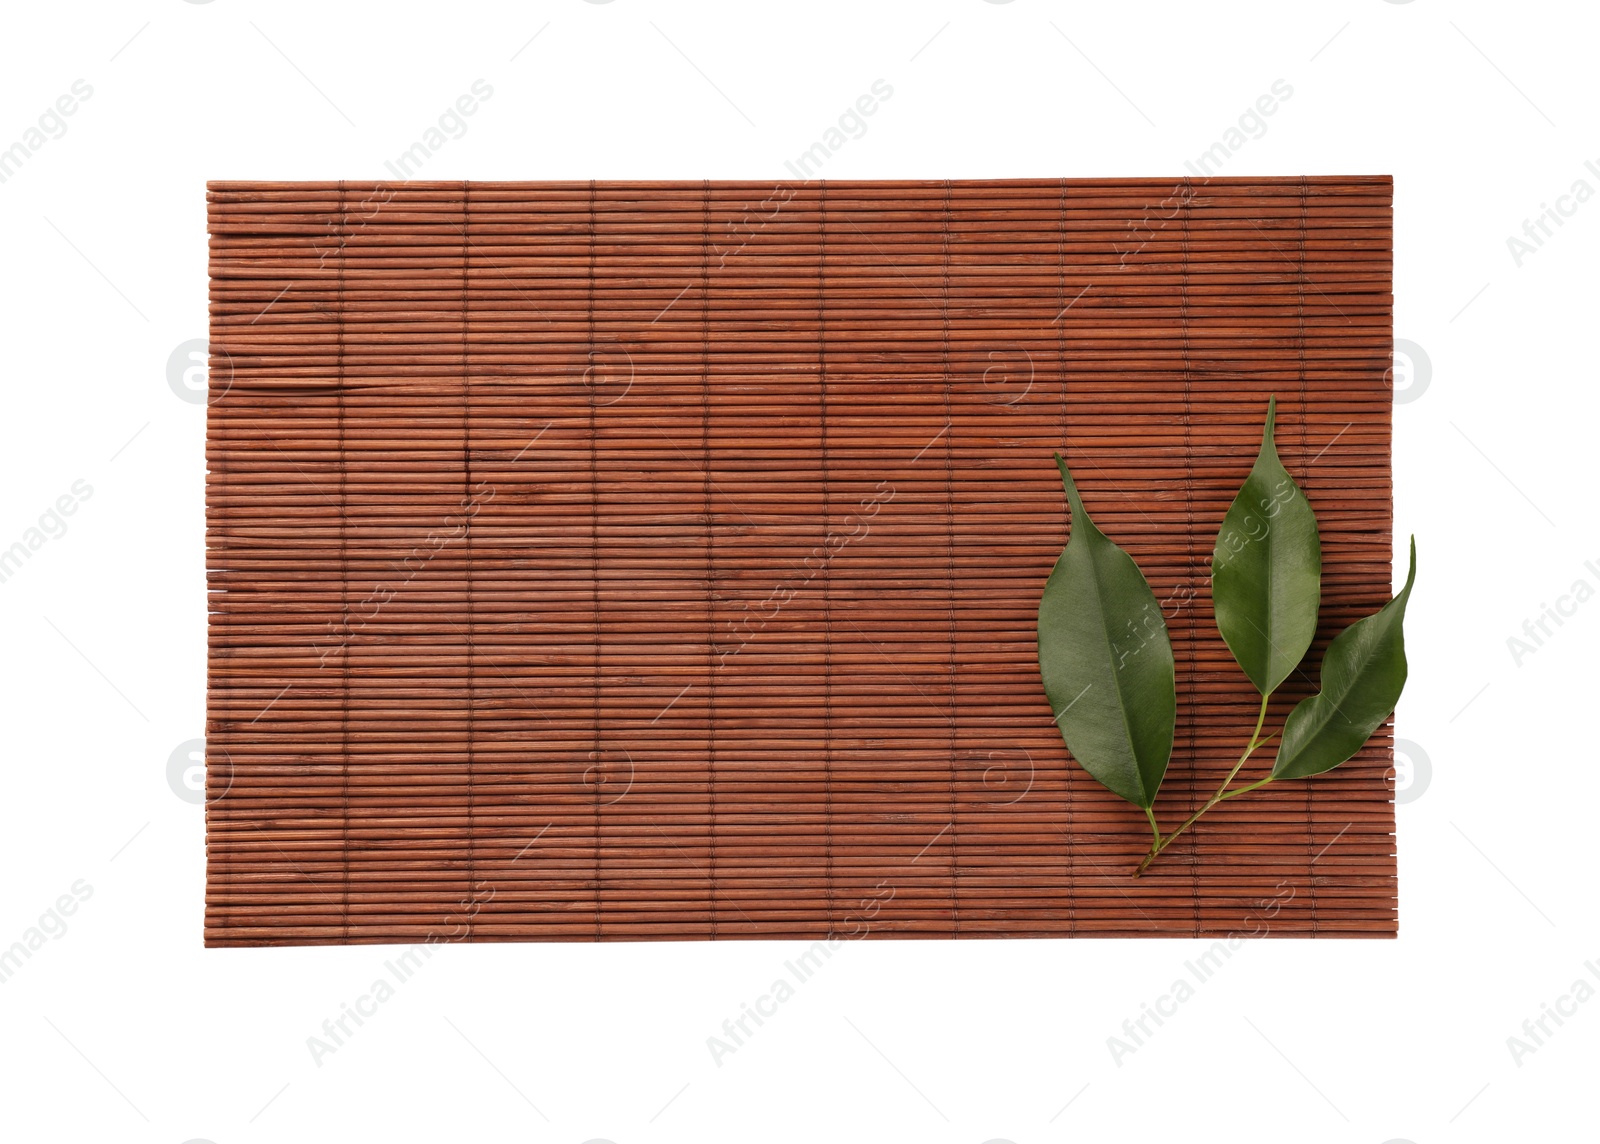 Photo of Sushi mat made of bamboo and leaves on white background, top view